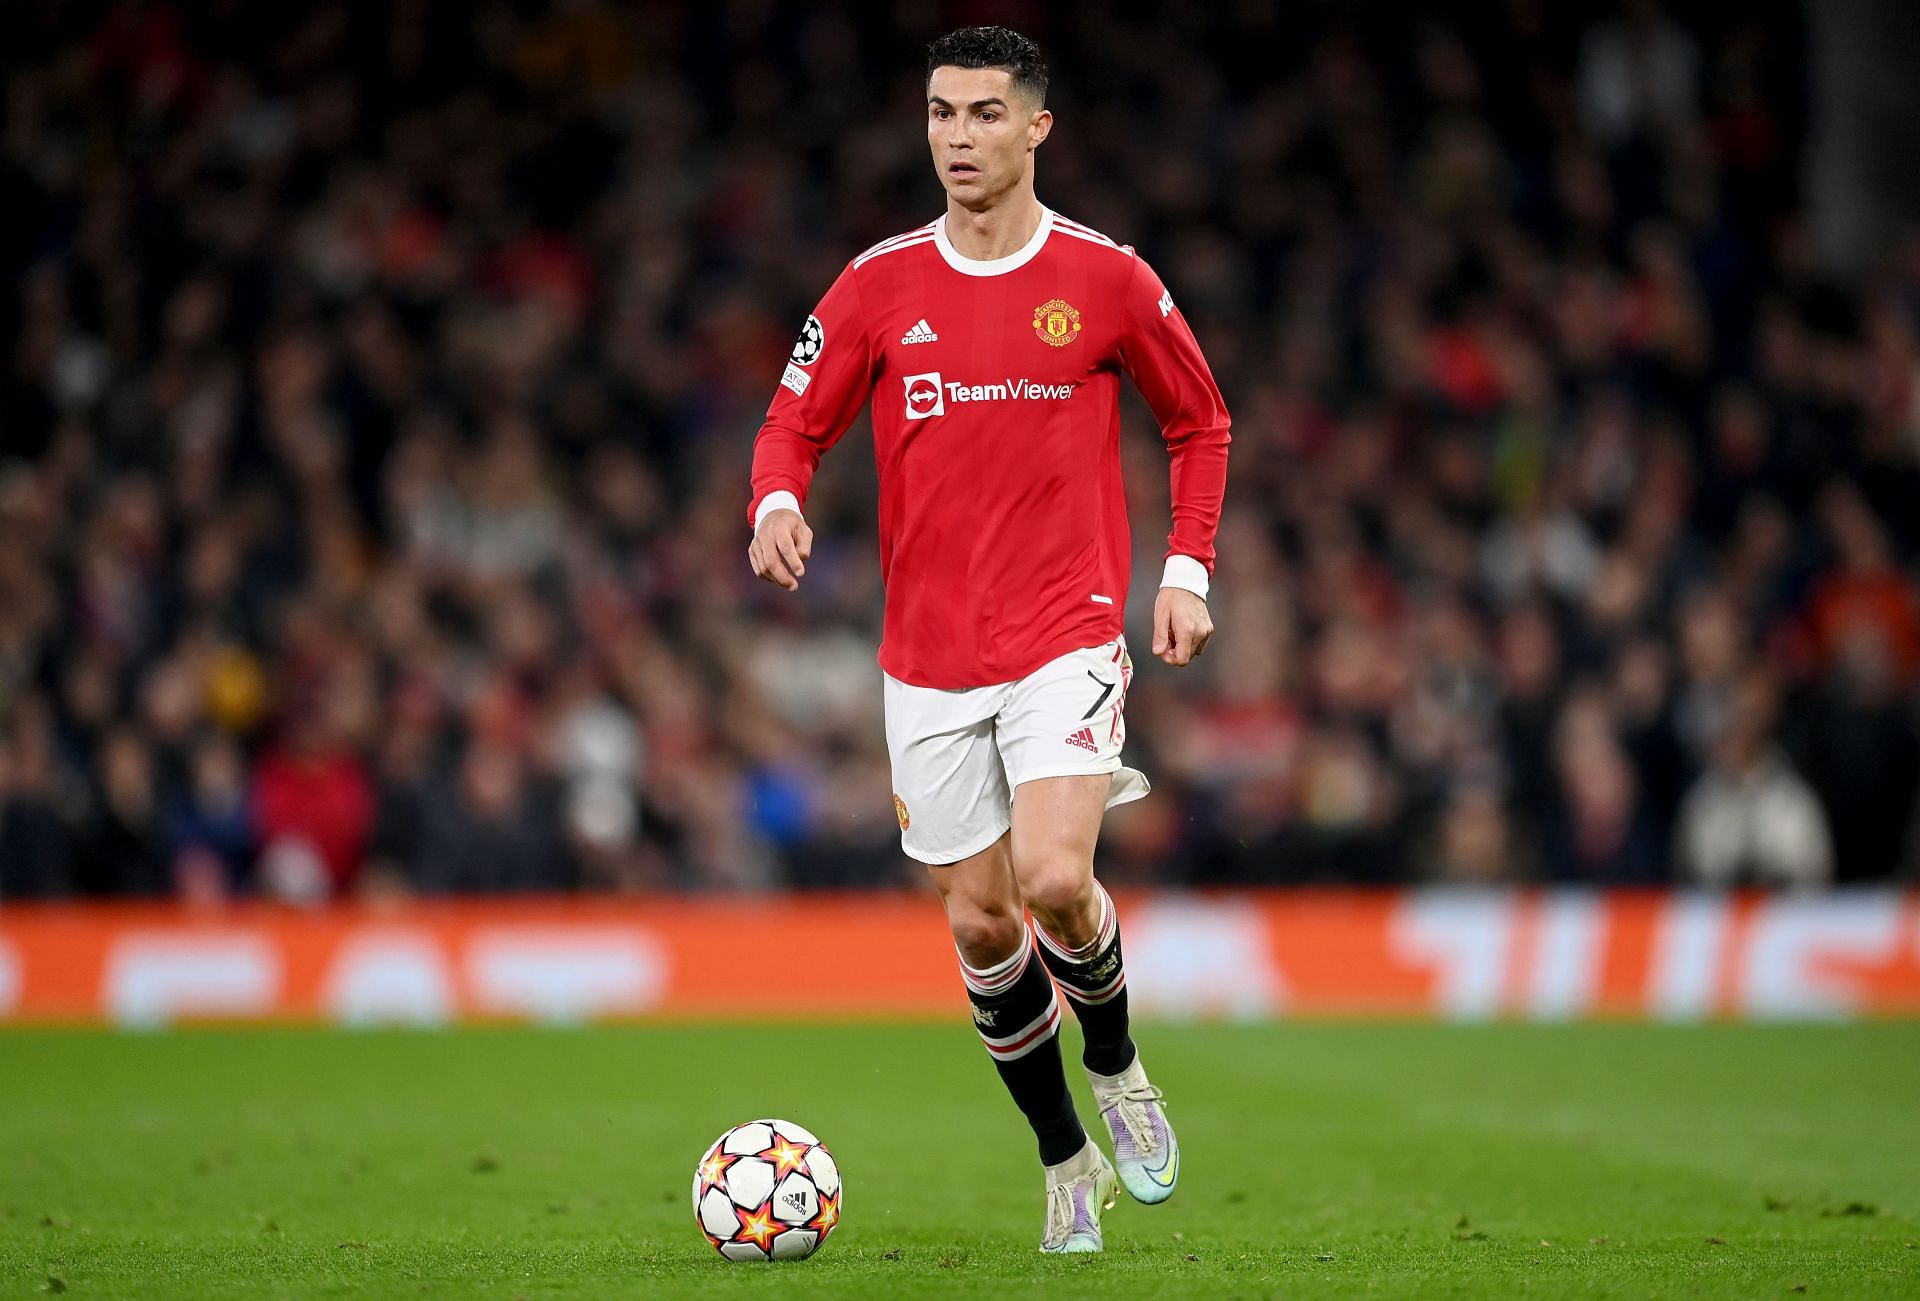 Manchester United star Cristiano Ronaldo did not play against Leicester City